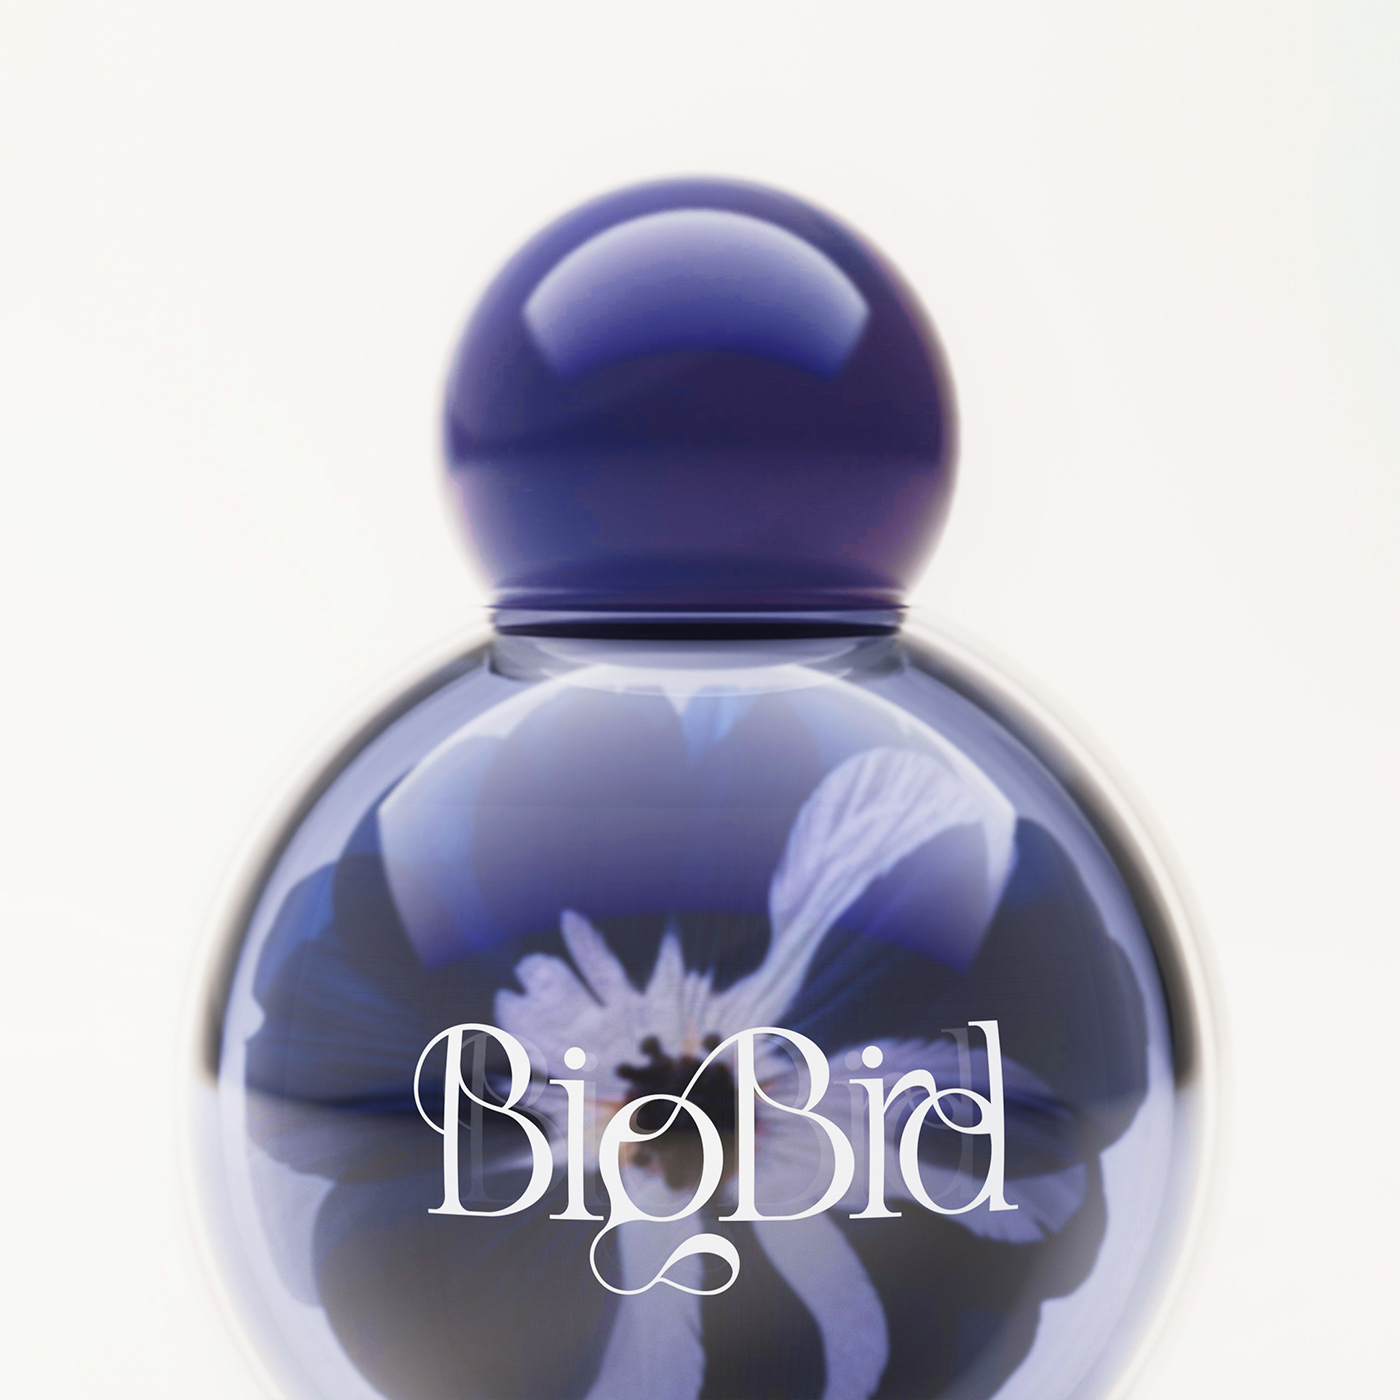 Packaging brand identity branding  ai Flowers parfume lettering graphic design  3D Fashion 